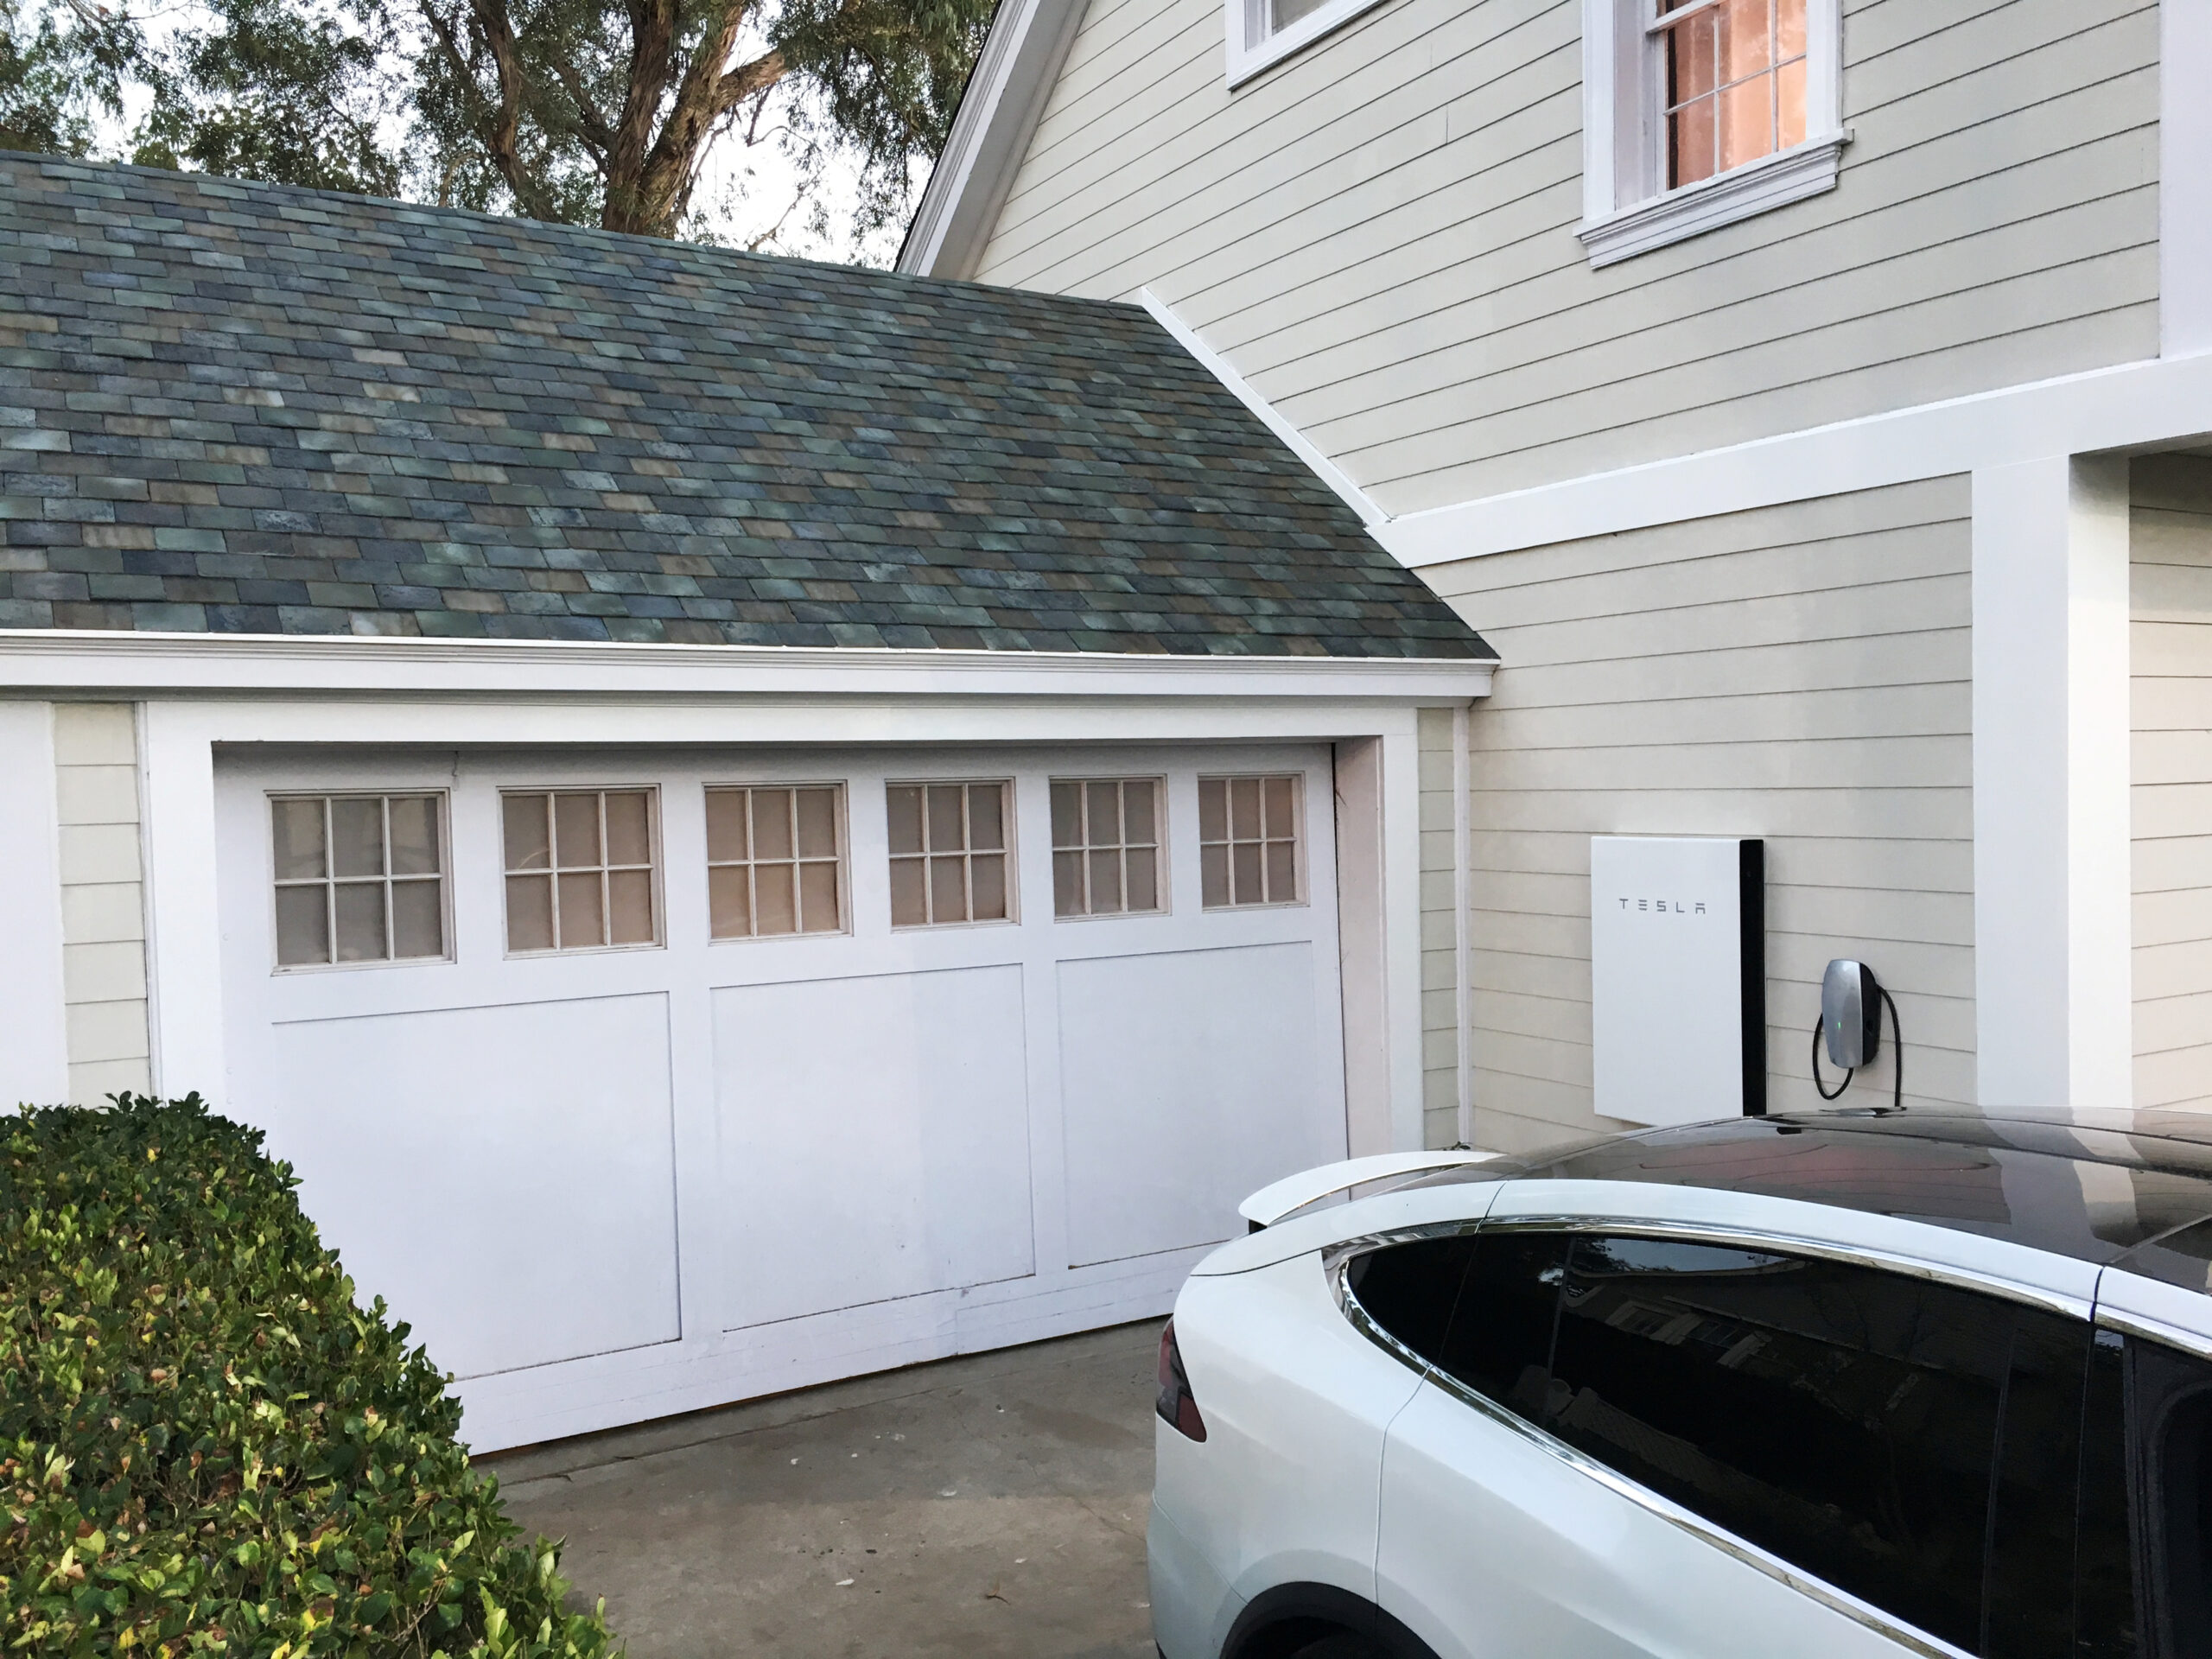 How Much Do Tesla Solar Shingles Cost